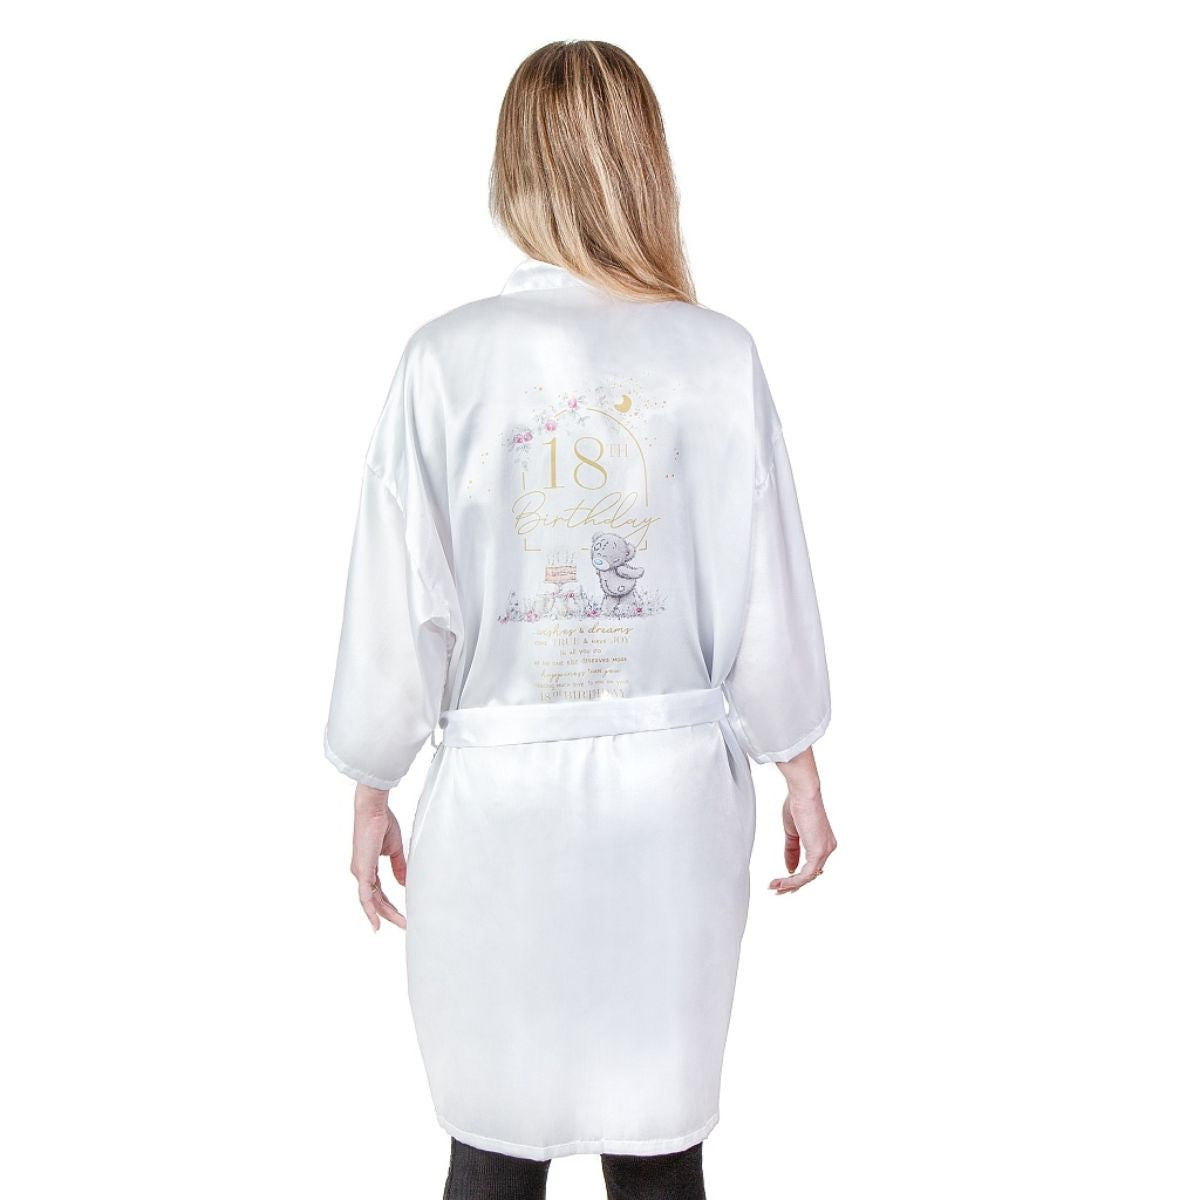 Me To You Signature Collection 18th Dressing gown shown from the back. Silky look white gown with long sleeves and belt. Large image printed on the back of Tatty Teddy blowing out the candles on a birthday cake.